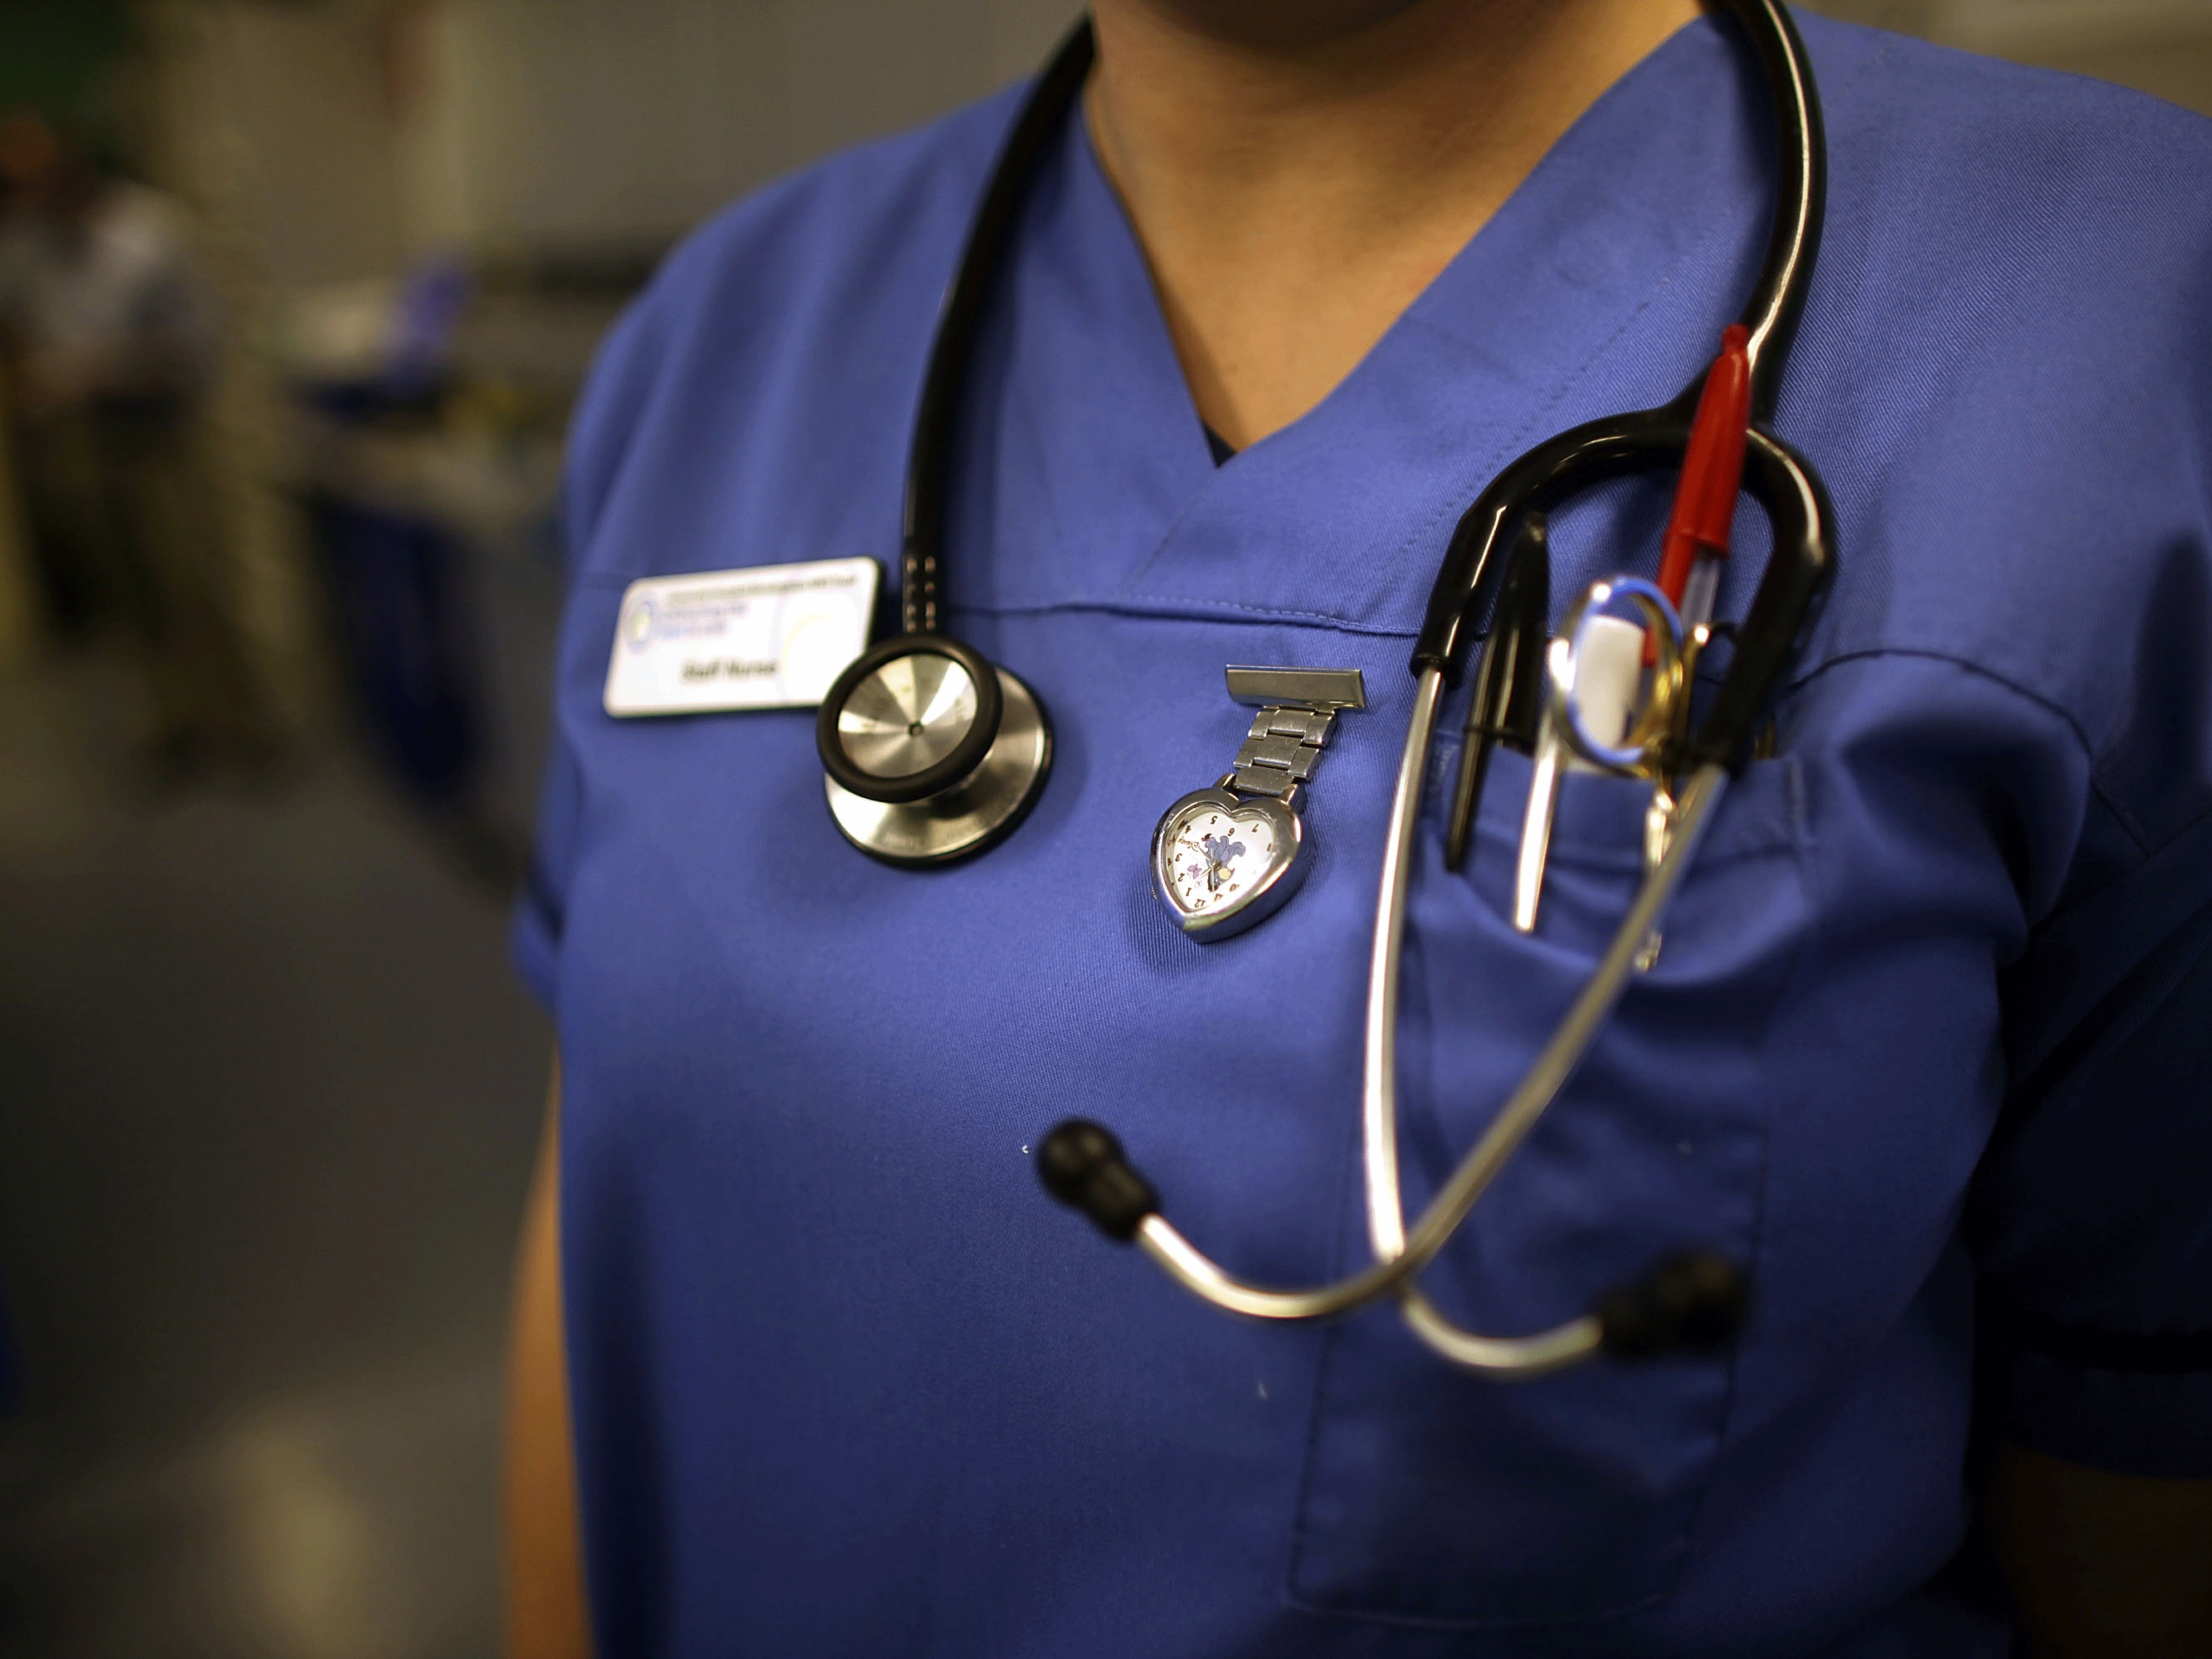 Ministers warned over new powers to control patient safety watchdog